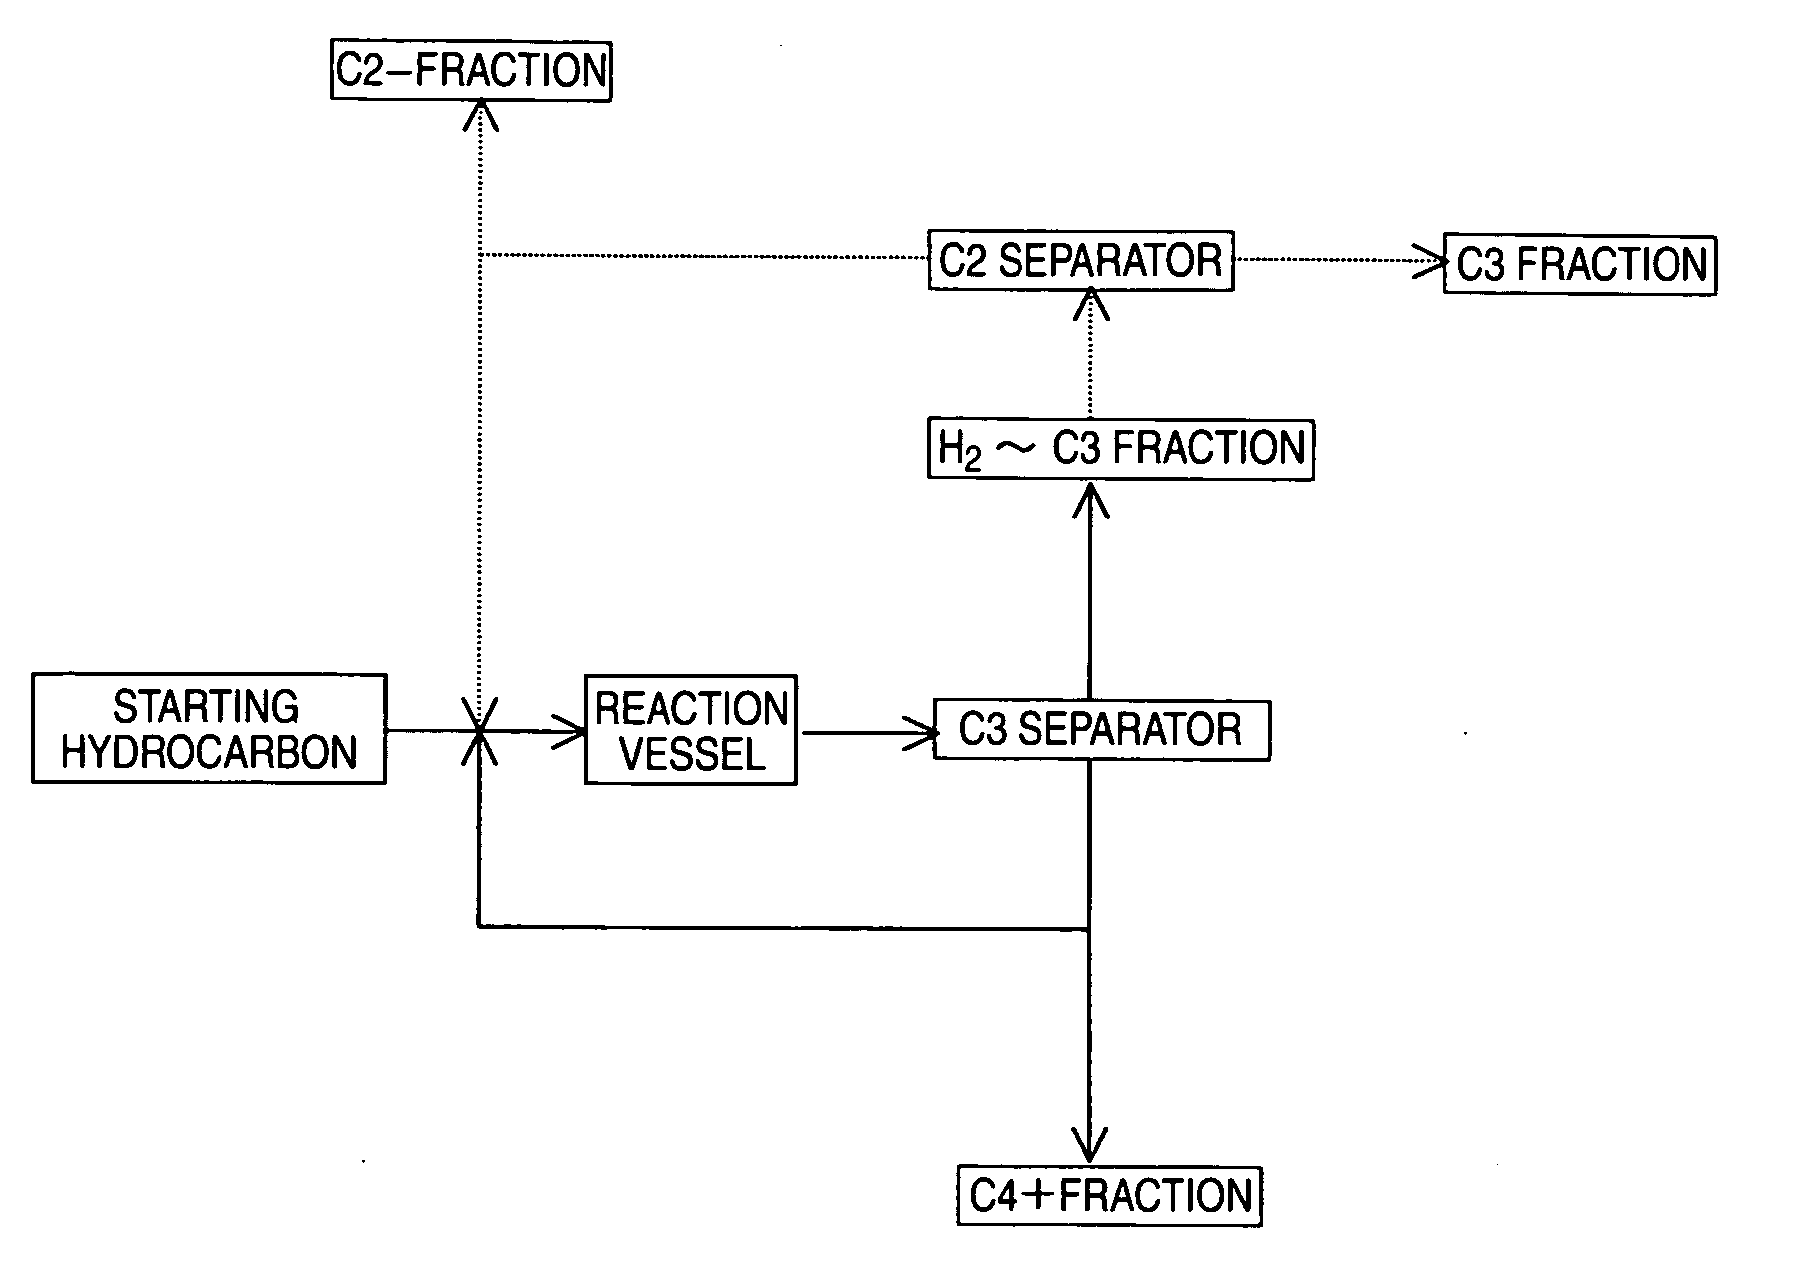 Process for Producing Ethylene and Propylene